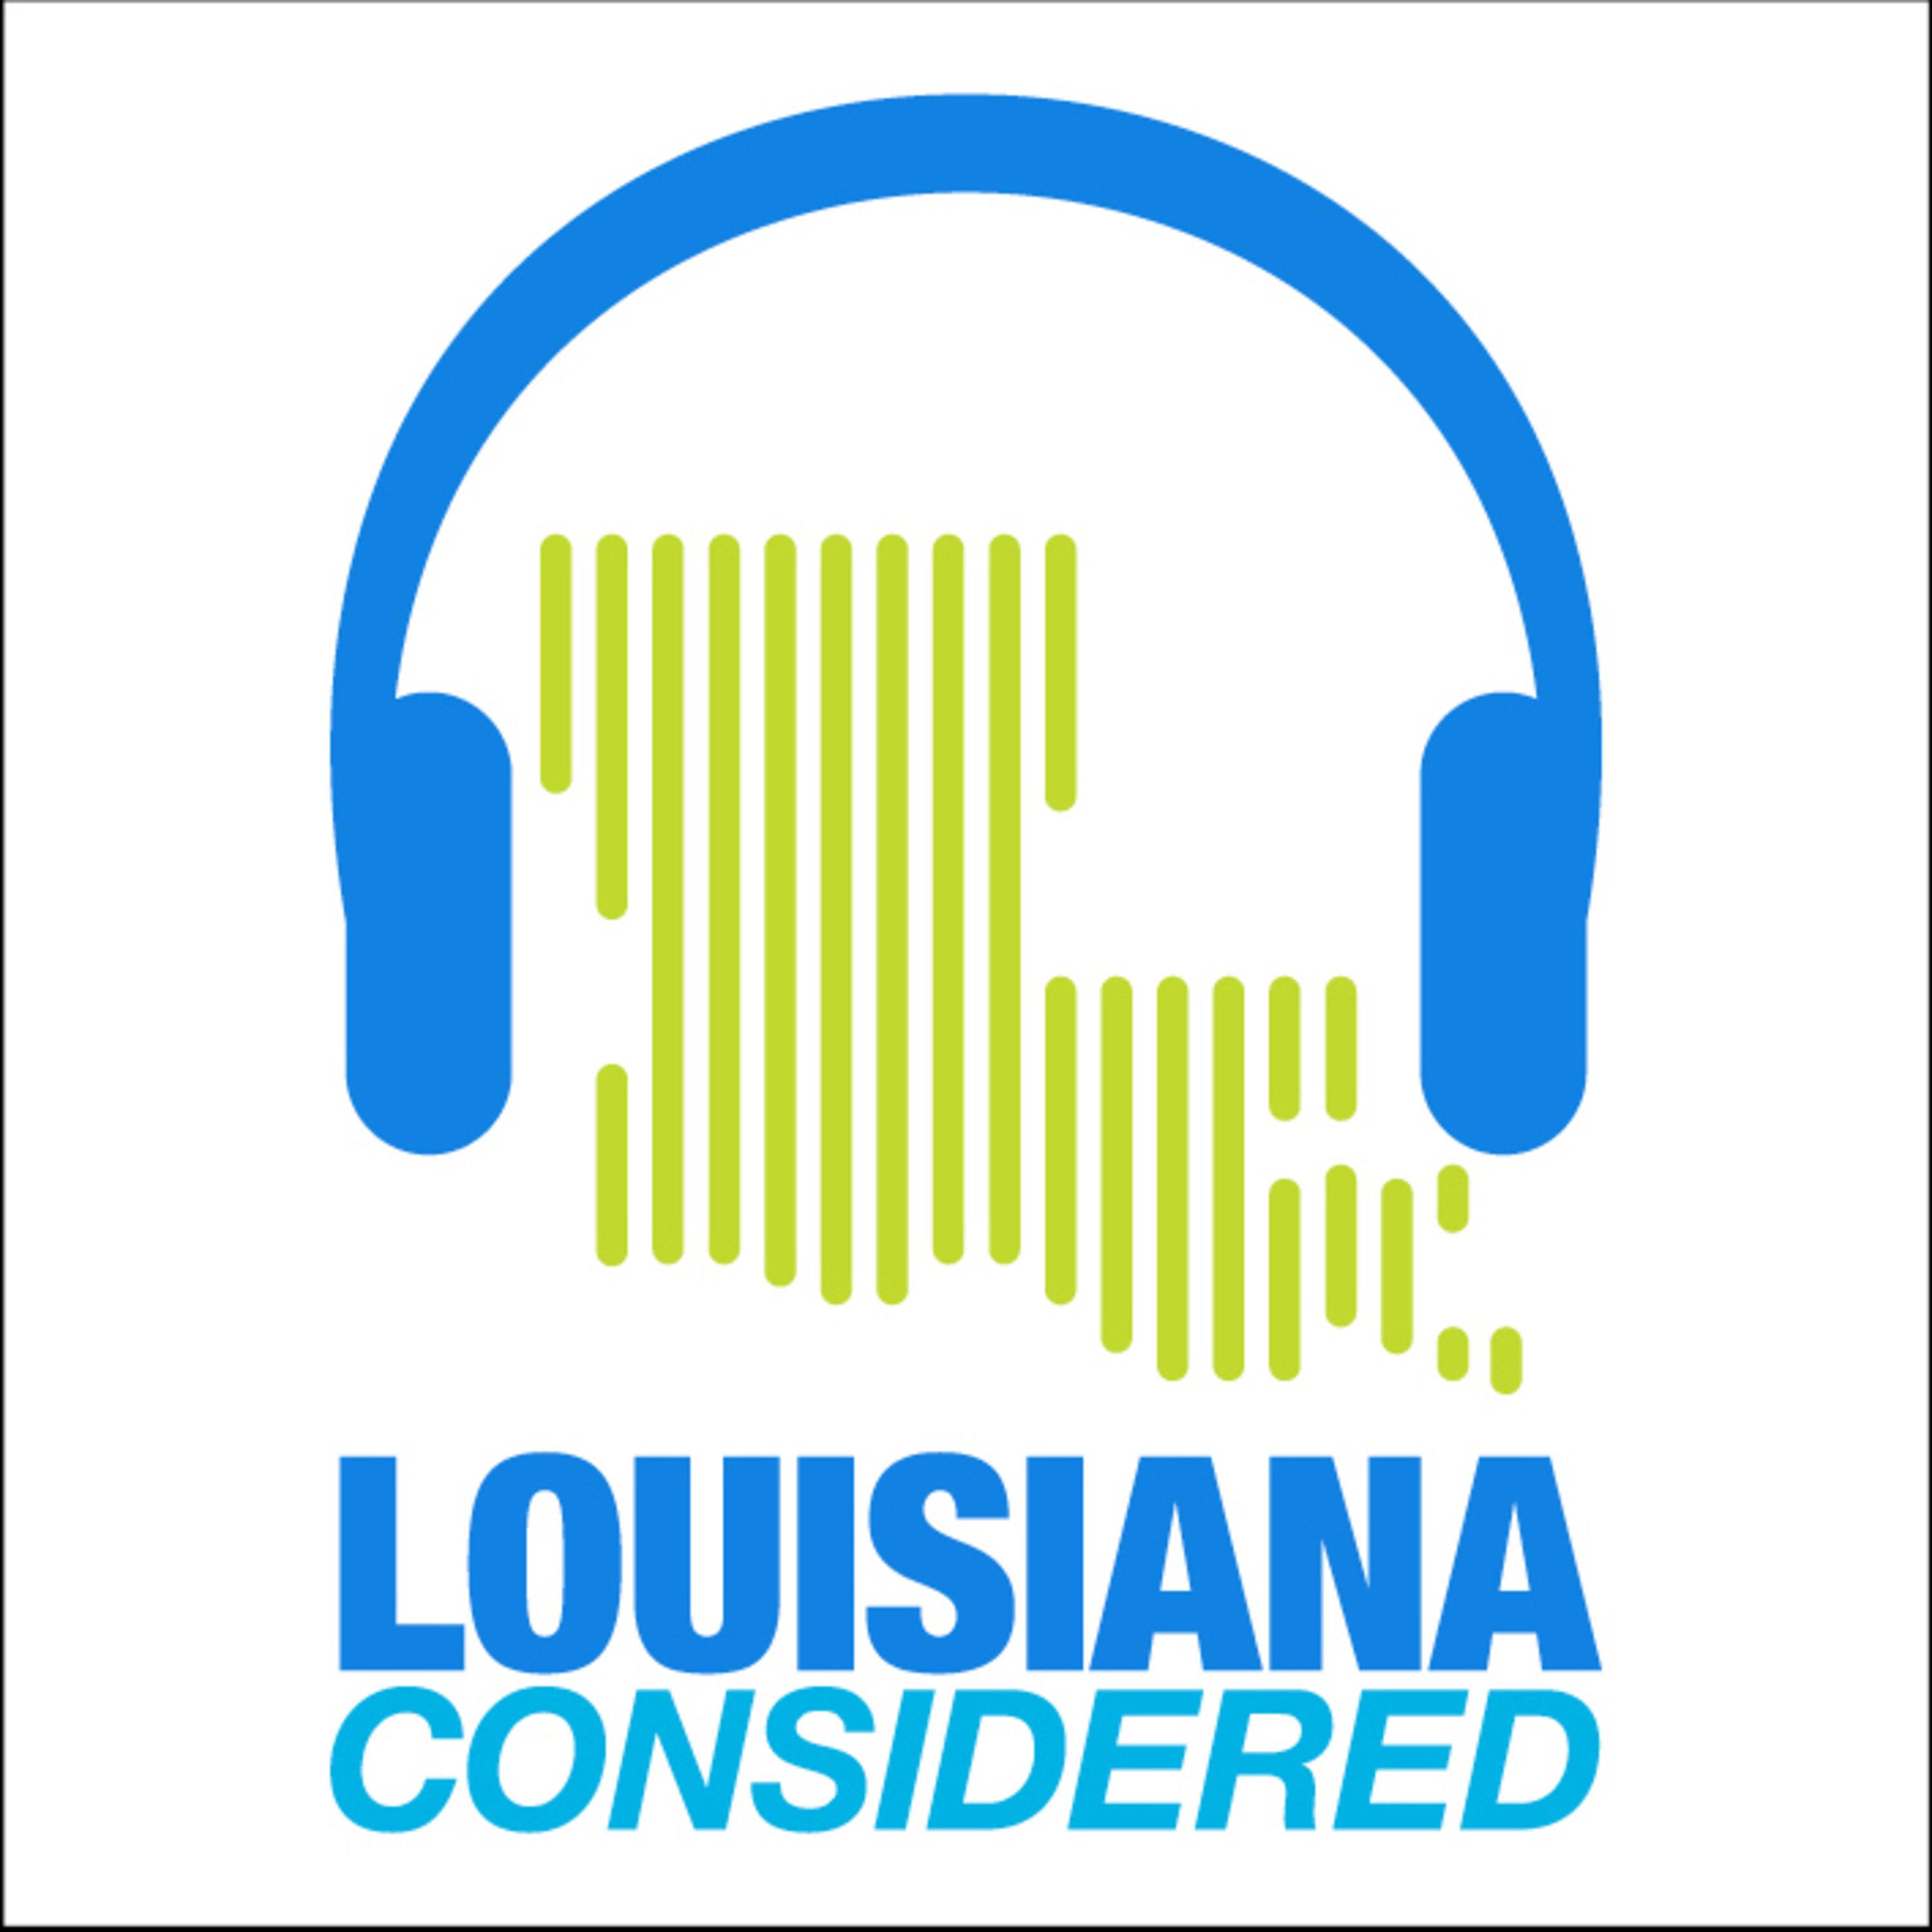 Thumbnail for "Louisiana Considered: What causes “Long COVID?”".